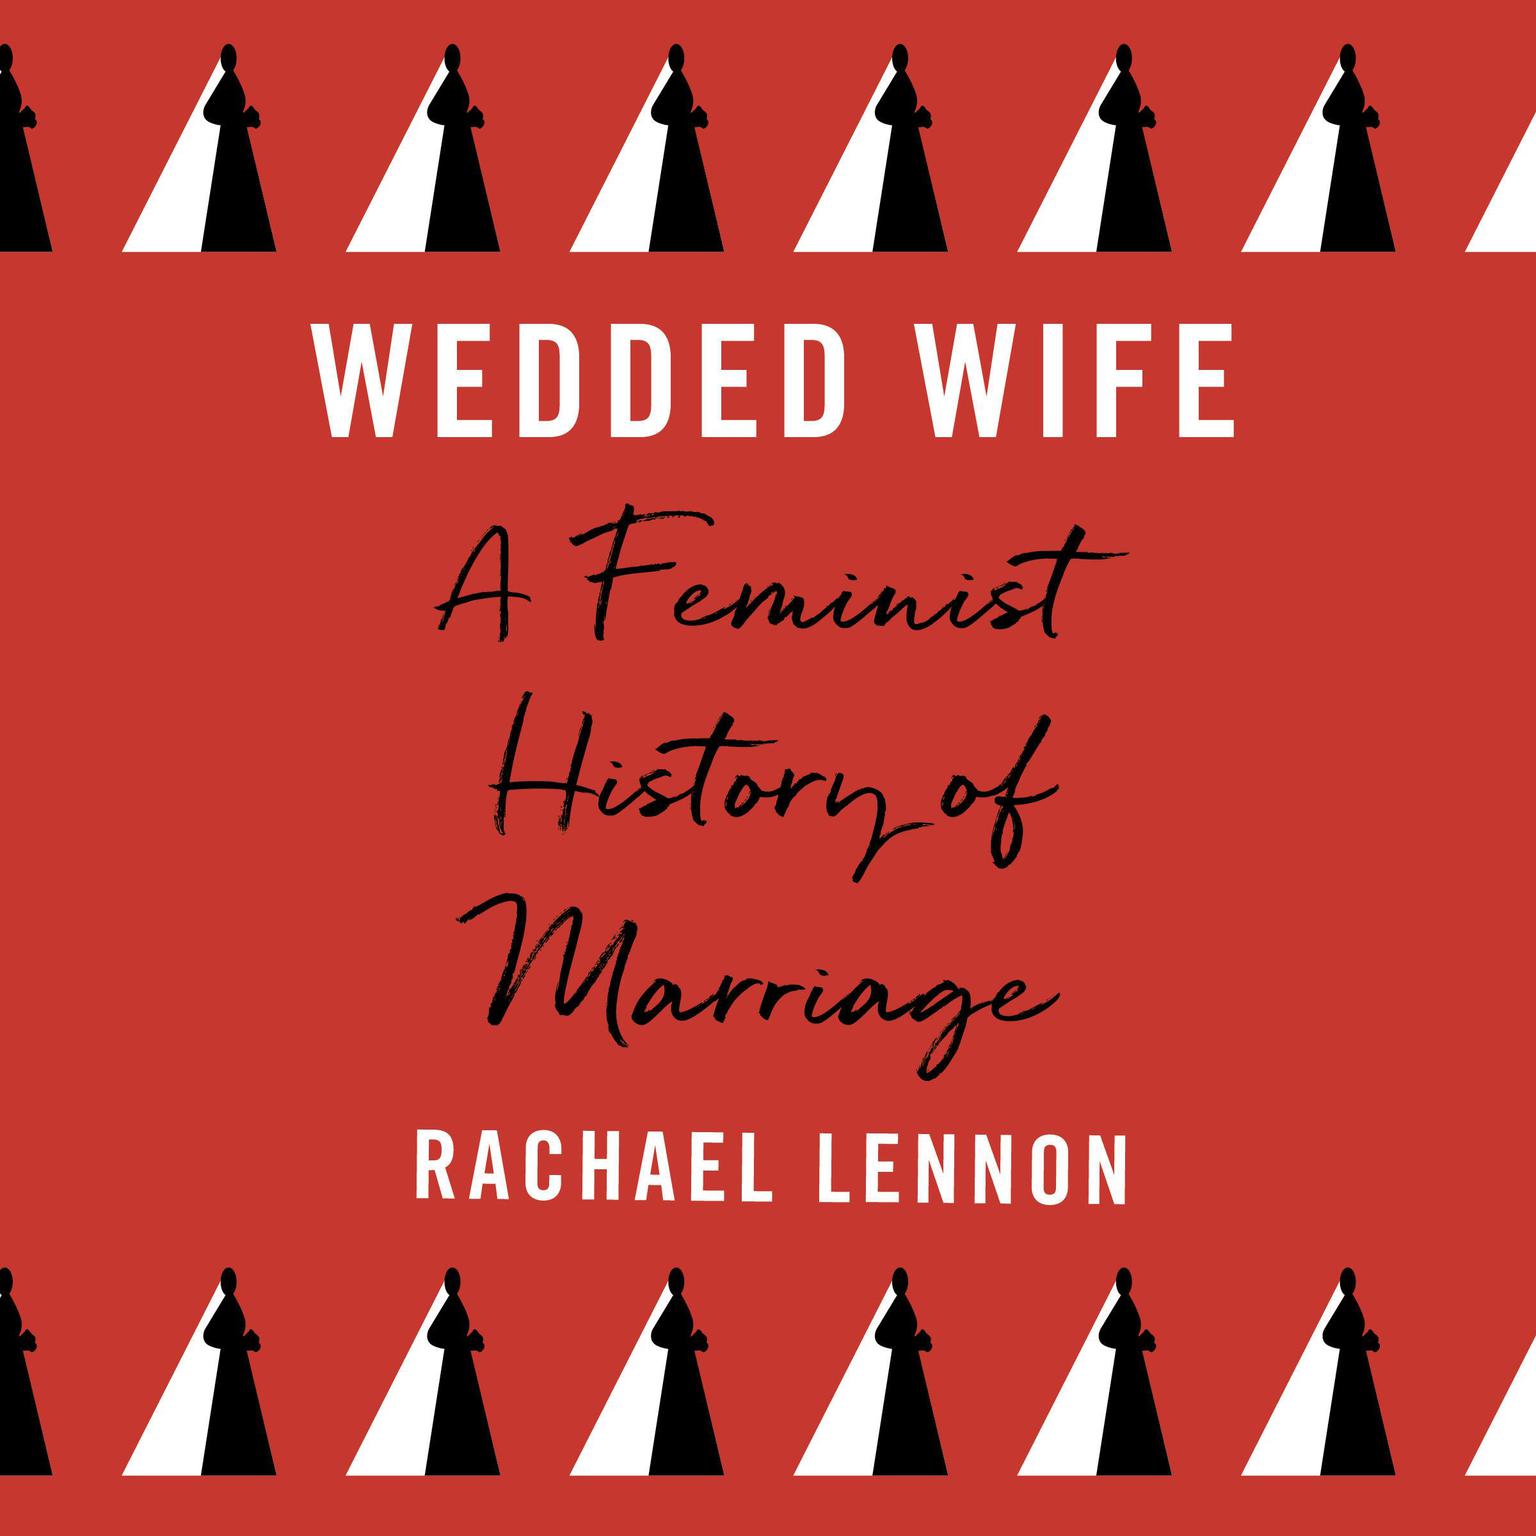 Wedded Wife: a feminist history of marriage Audiobook, by Rachael Lennon